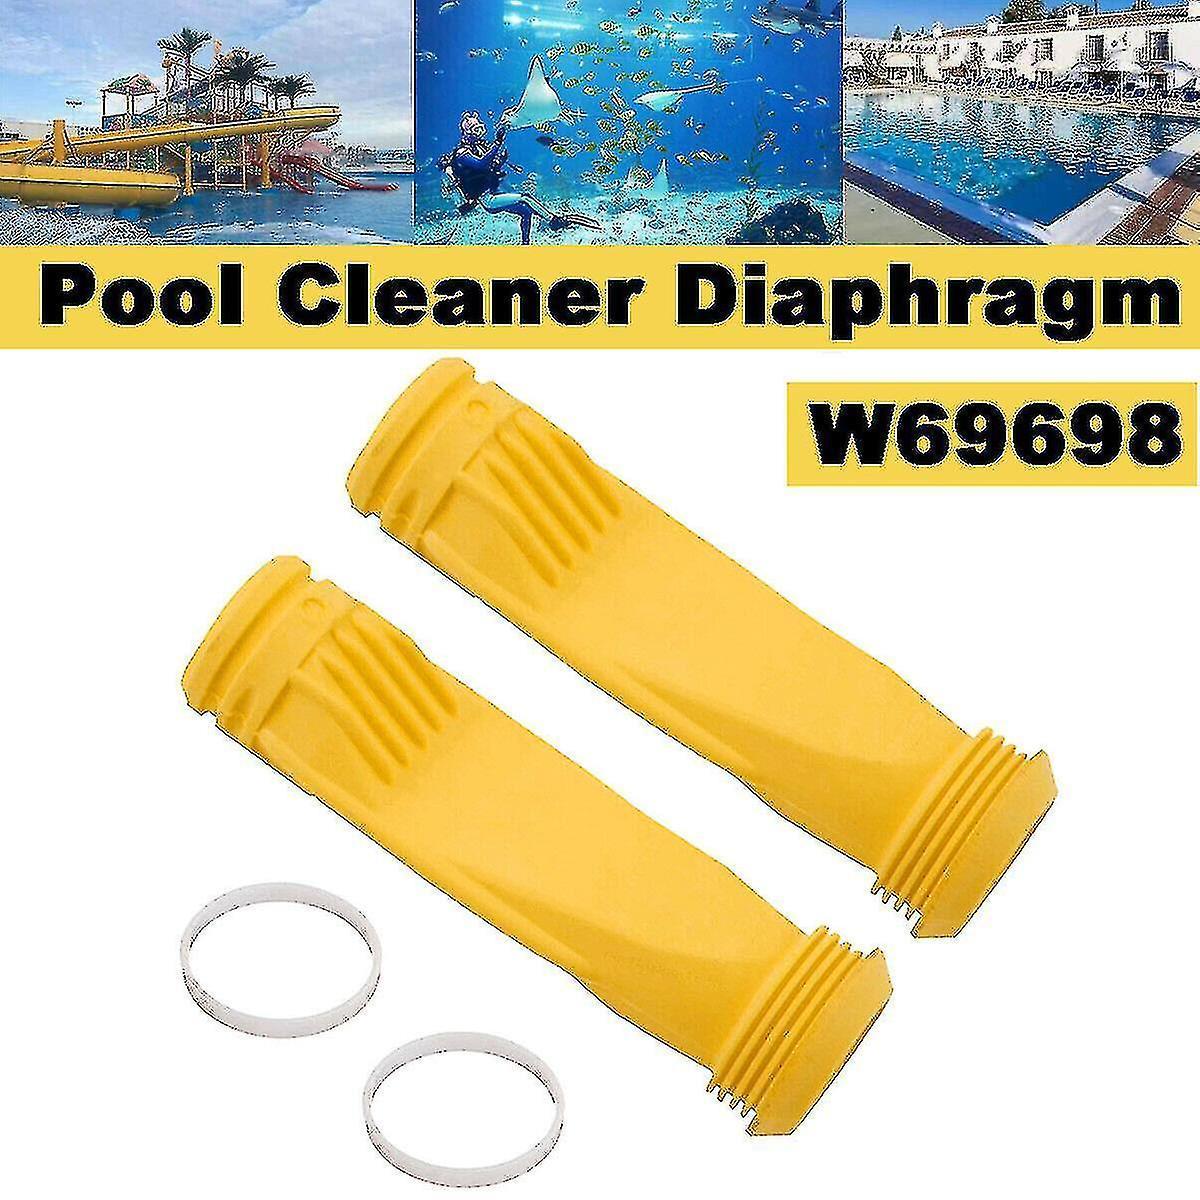 2pcs Pool Cleaner Diaphragm With Ring For Zodiac Baracuda G3 G4 Replacement W69698